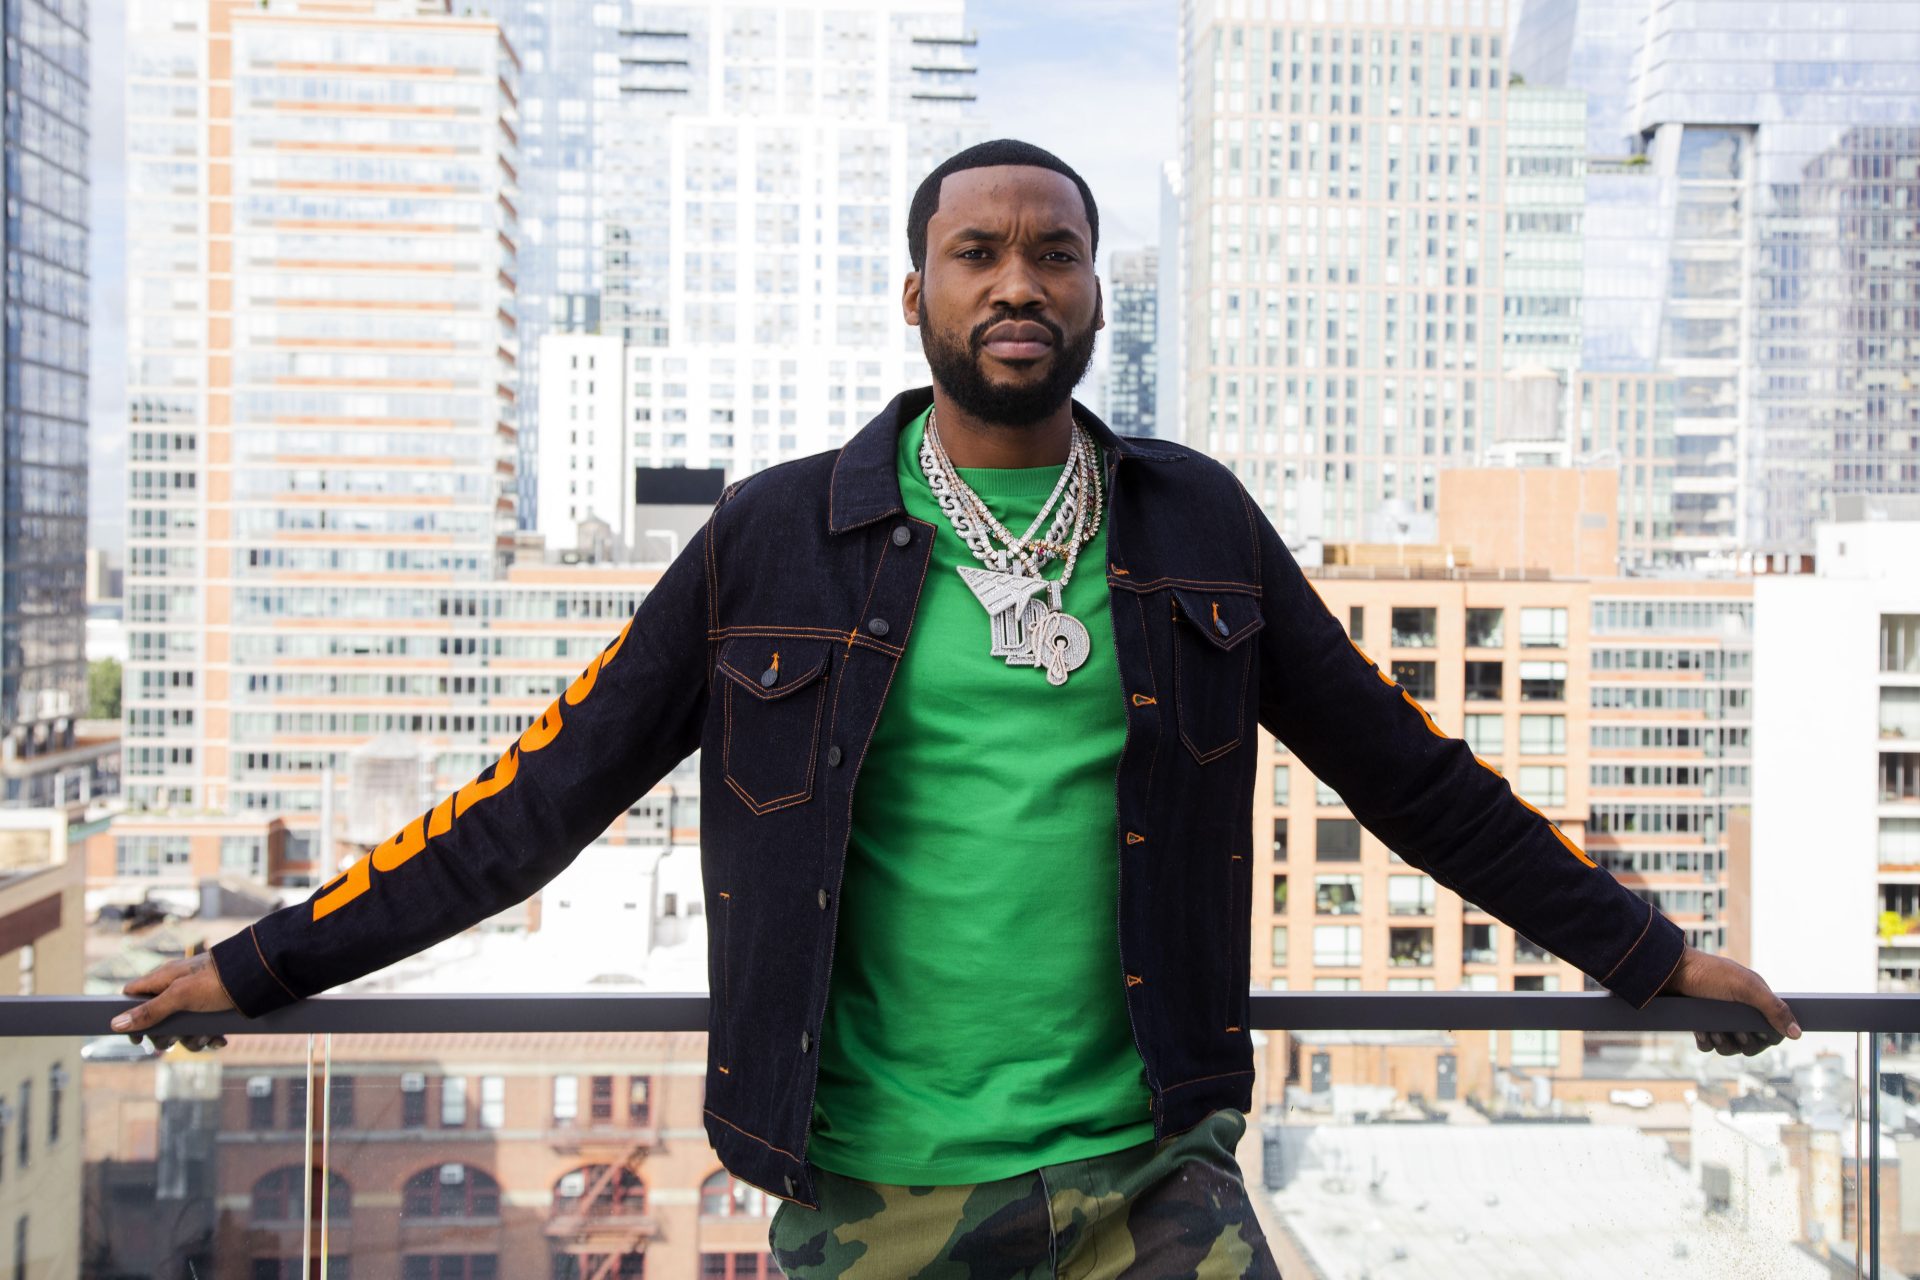 Meek Mills - Find out Meek Mills watch collection